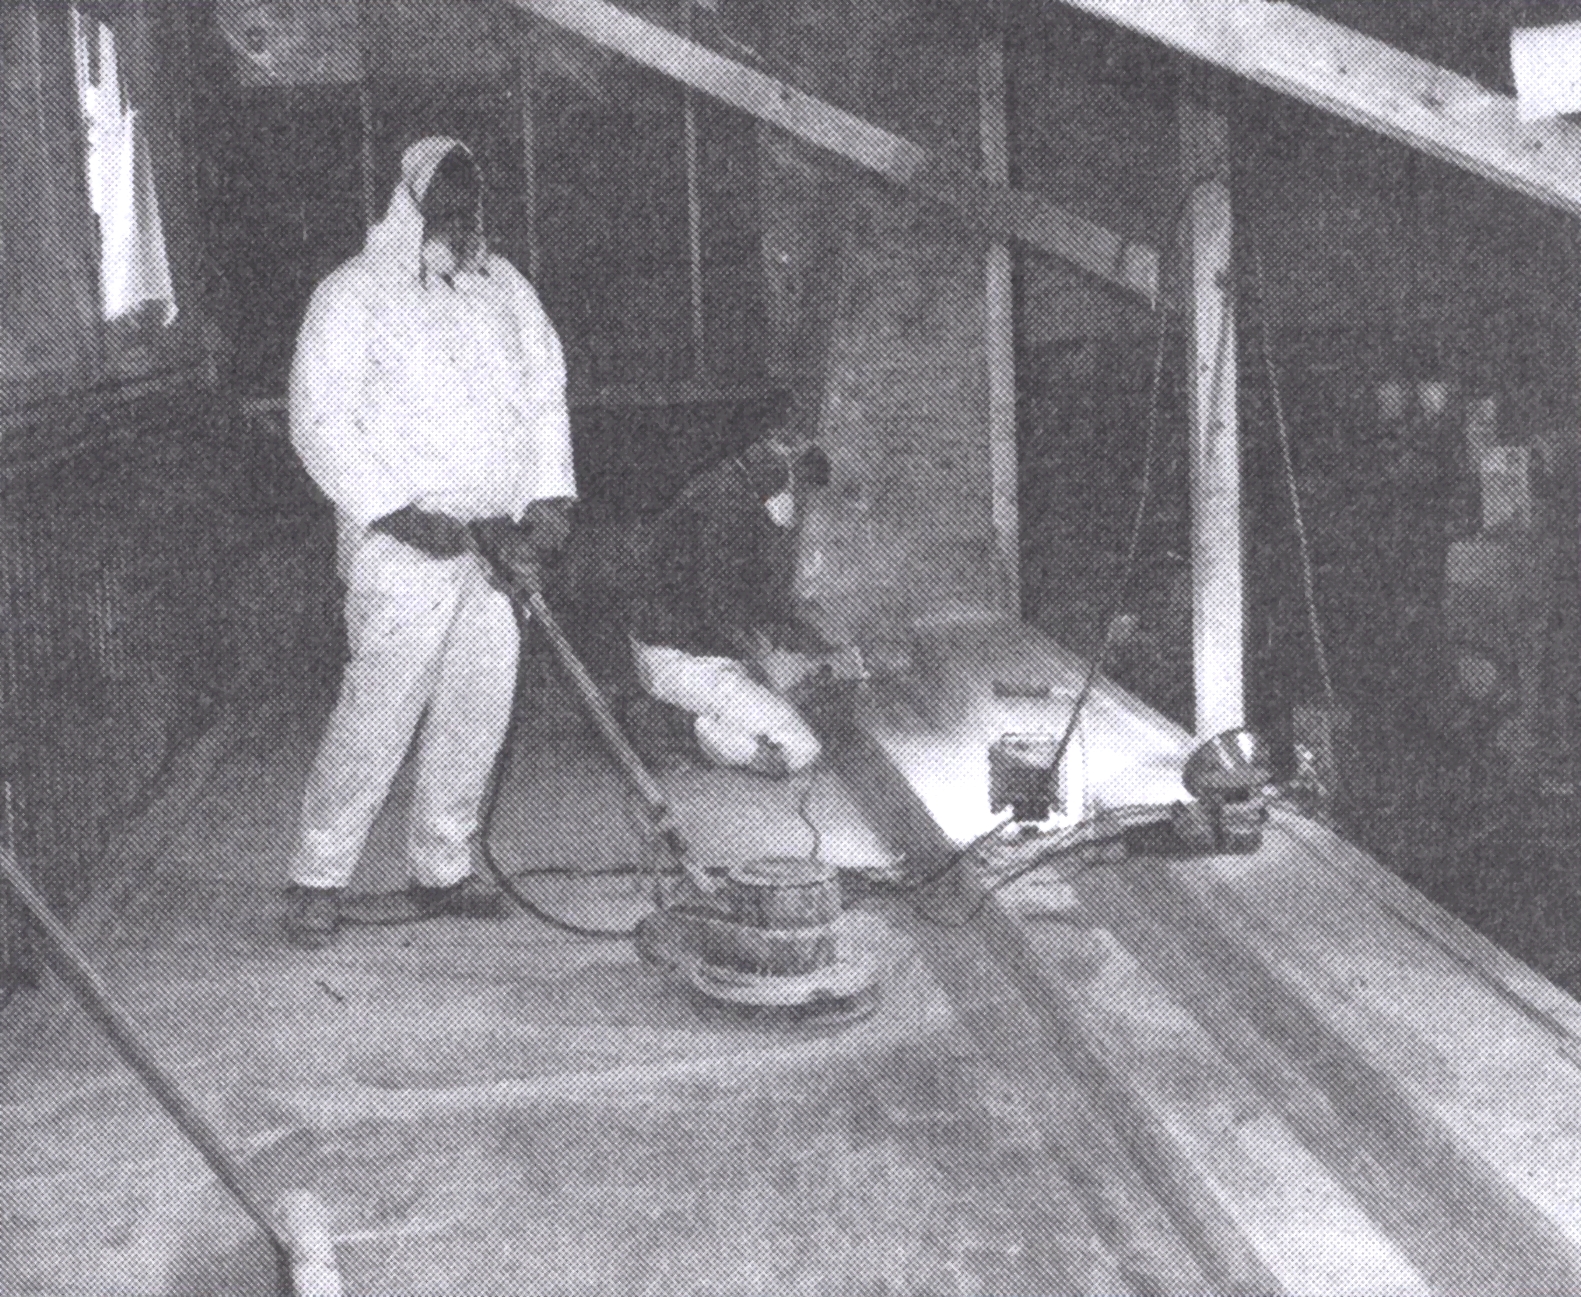 A coat of epoxy with a fire retardant additive was applied and the surfaces were sanded again. A floor sander was used on the large flat areas.